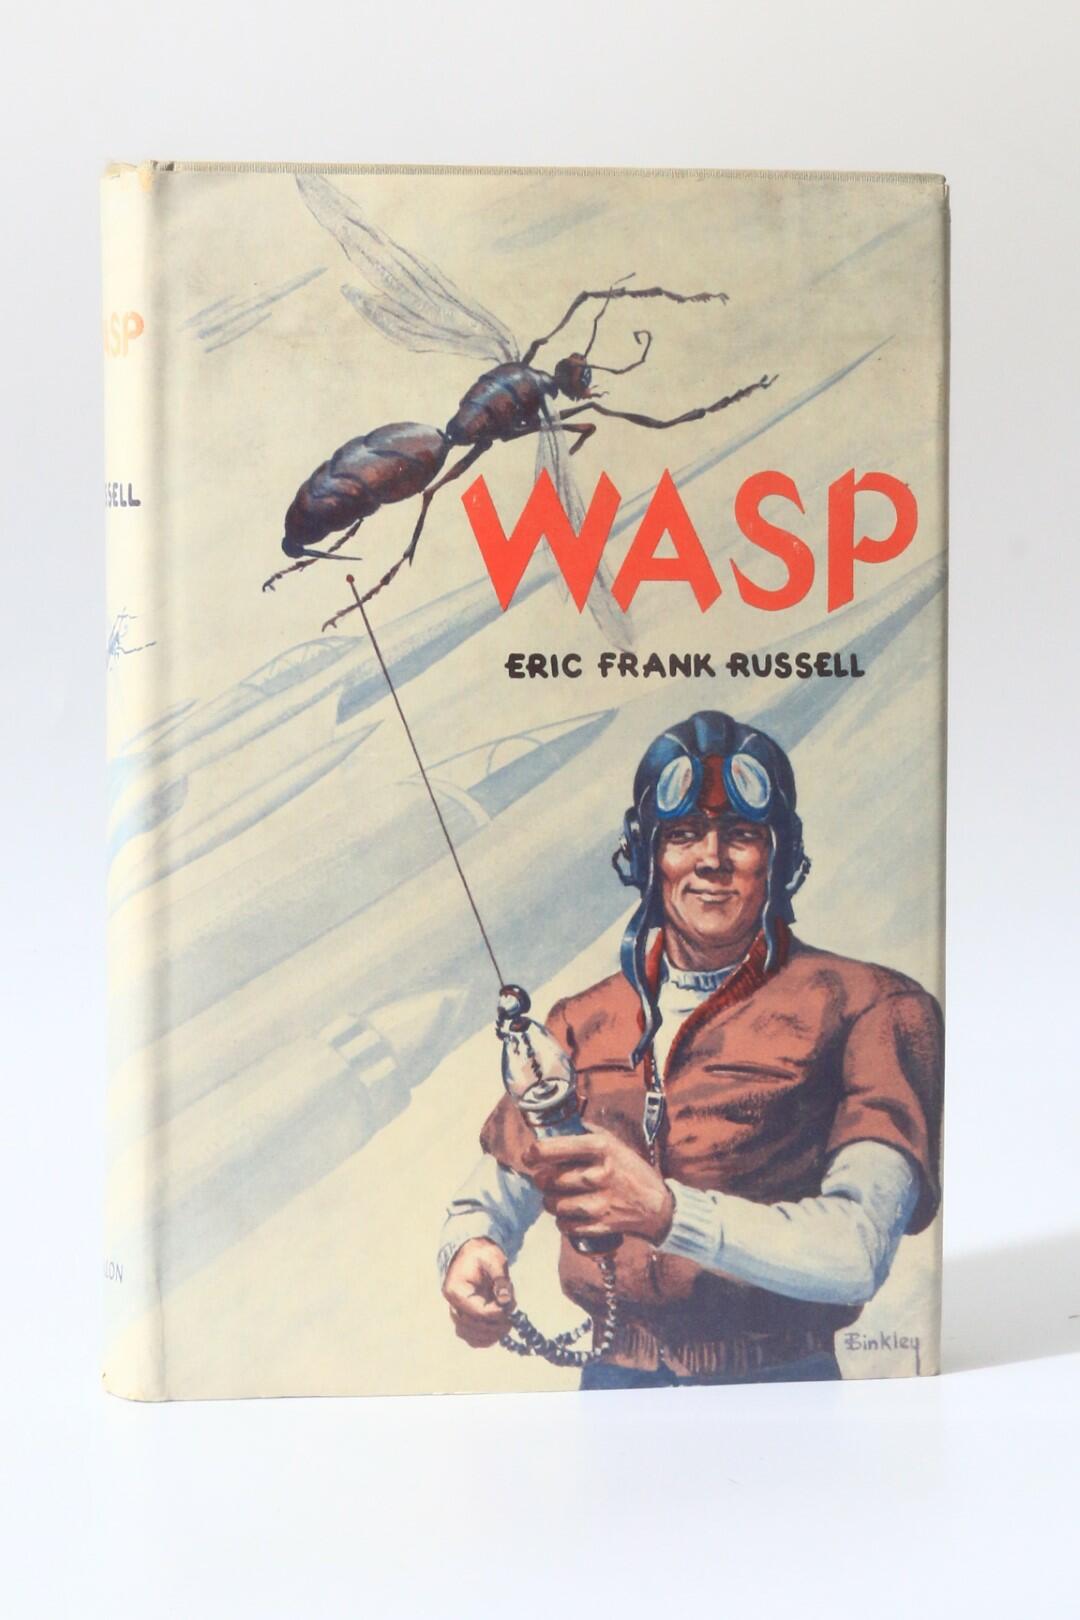 Eric Frank Russell - WASP - Avalon Books, 1957, First Edition.